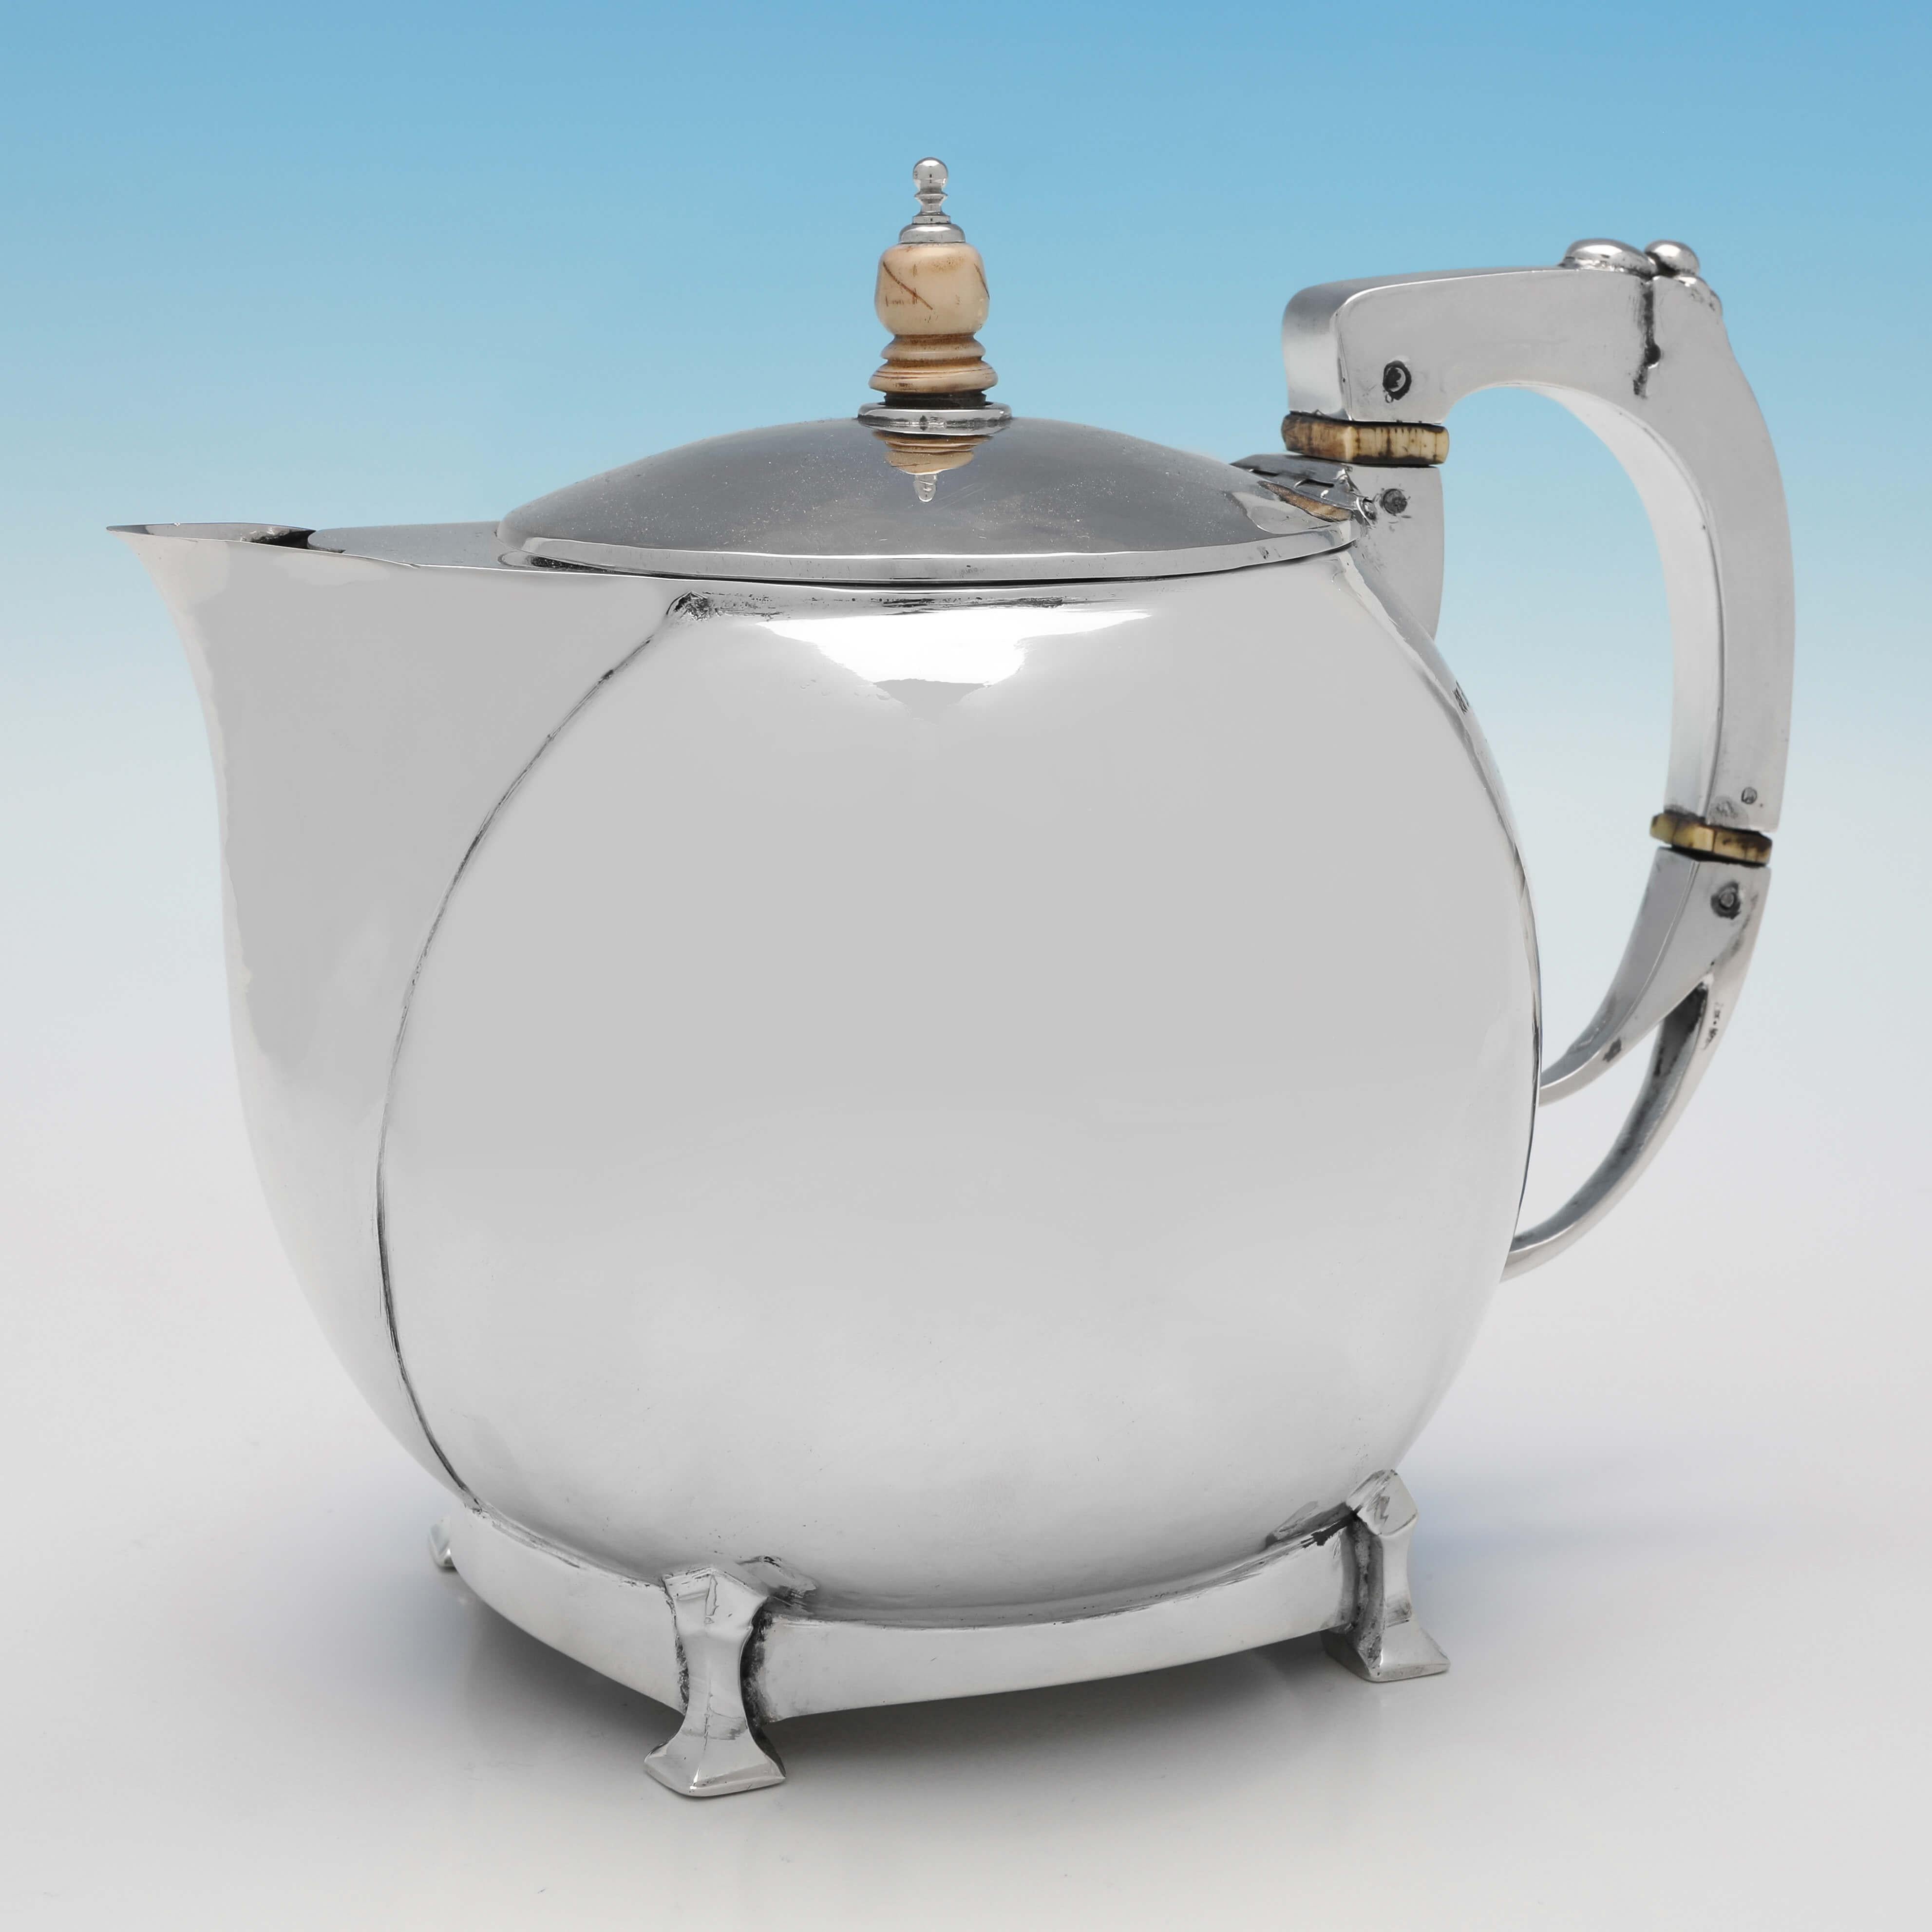 Hallmarked in Birmingham in 1929 (the hot water pot hallmarked in 1935) by William Henry Creswick, this wonderful, 4 piece Sterling Silver Tea Set, is a superb example of Arts & Crafts design. The teapot measures 6.75